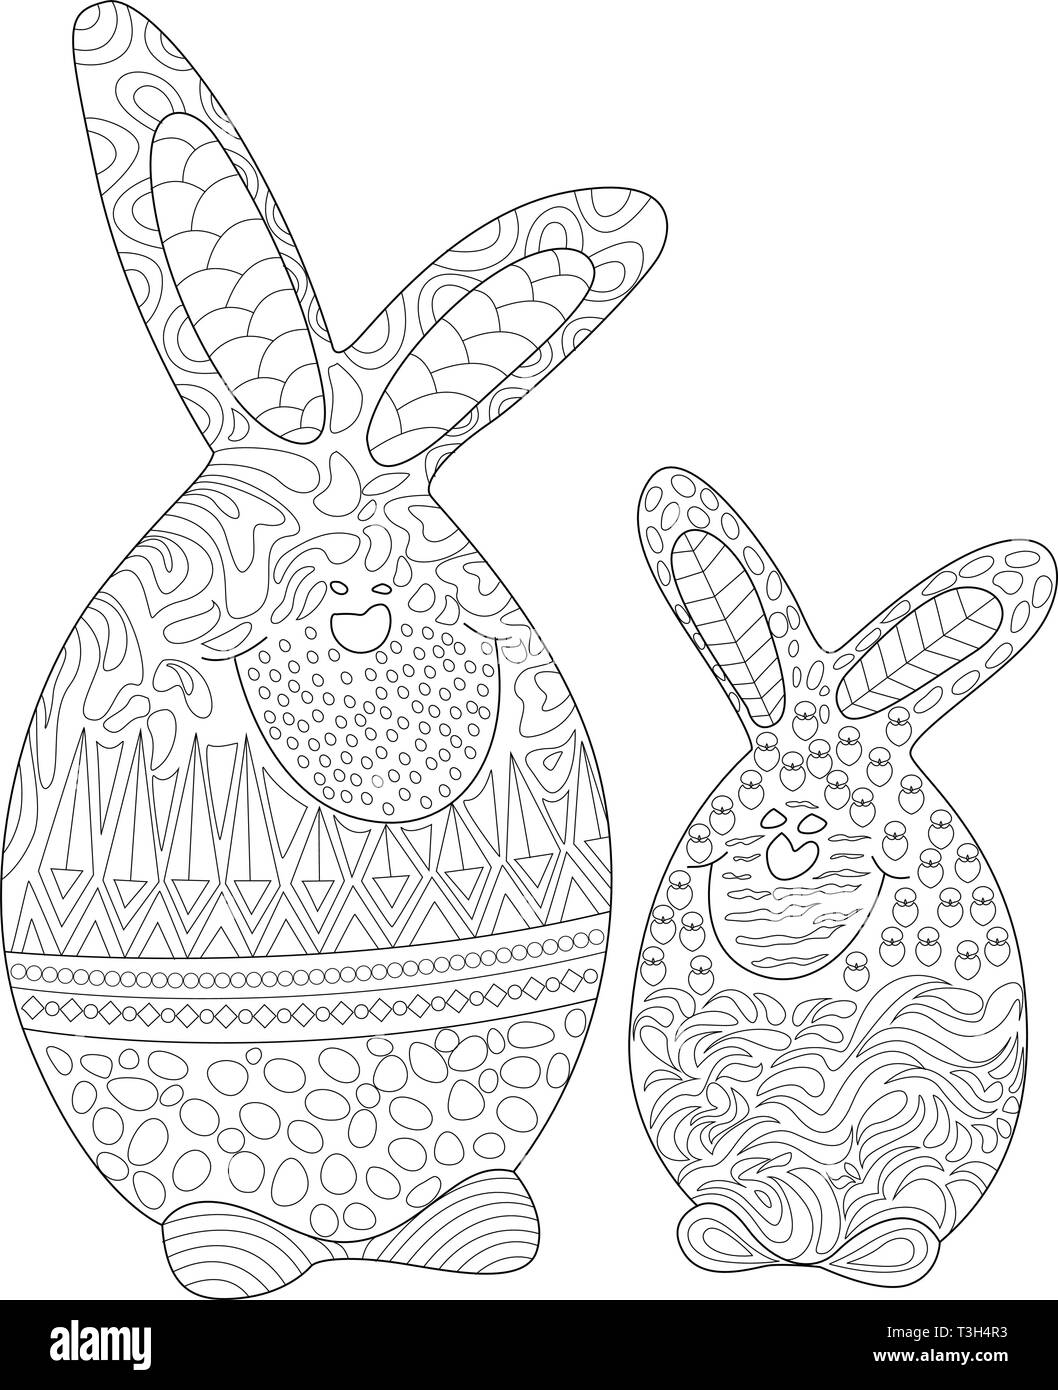 Funny Easter Bunny in Coloring Page for Adults and Children Stock Vector